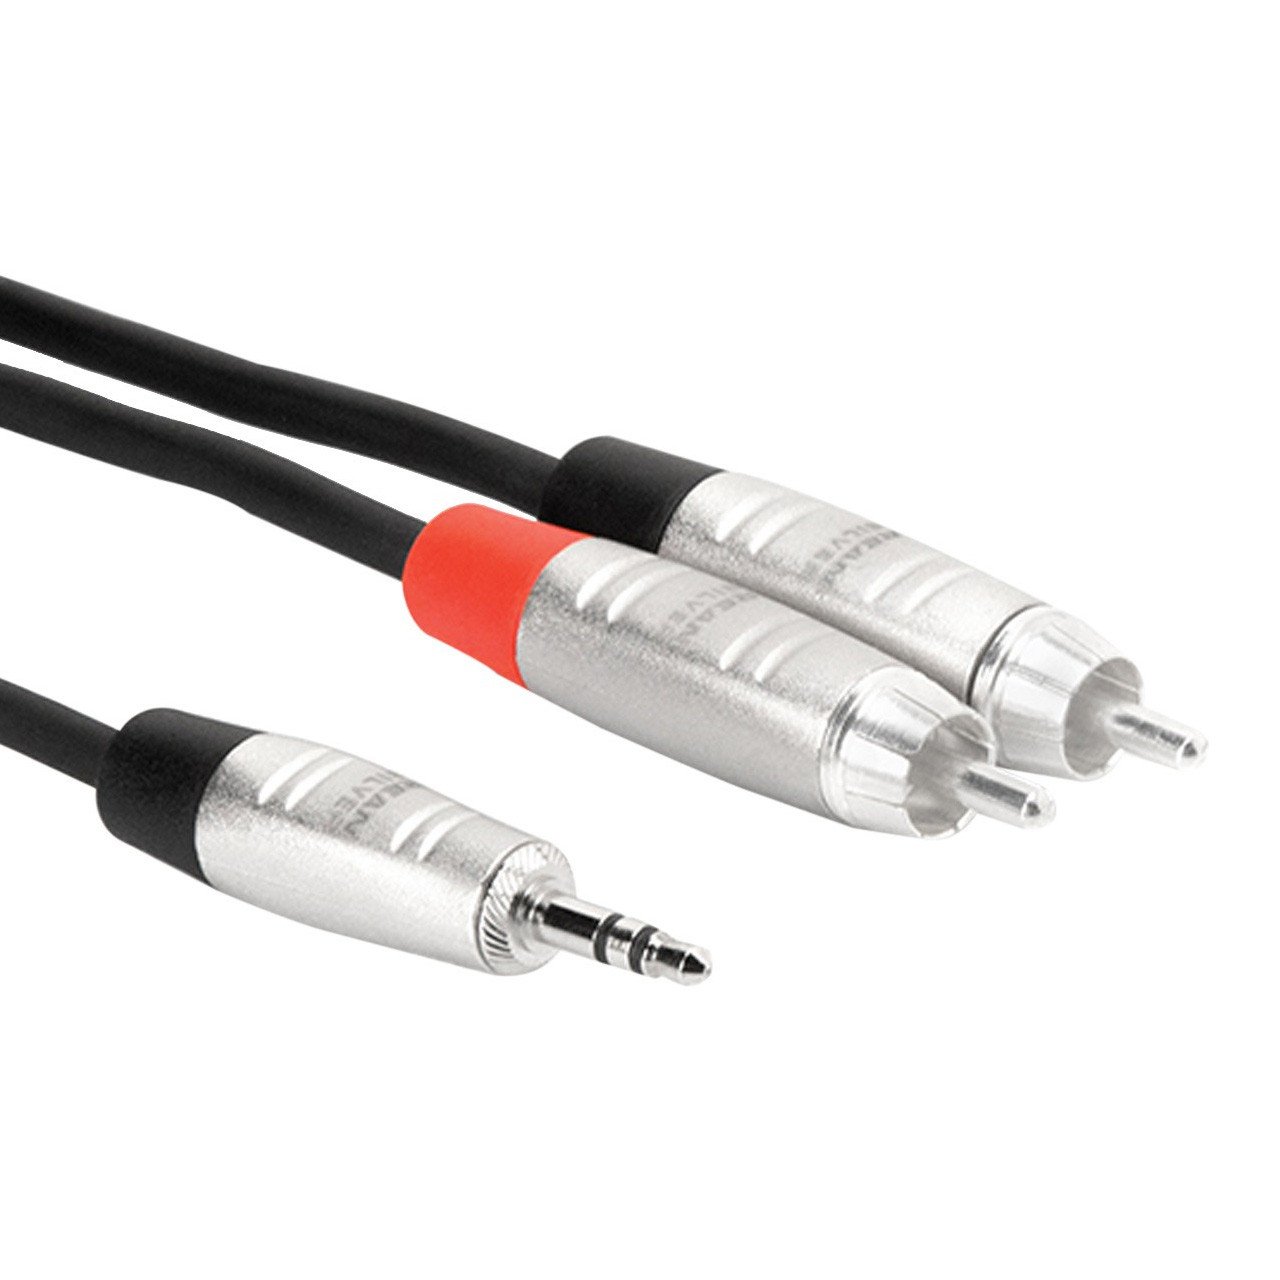 Cables & Adapters - Hosa Pro Stereo Breakout - REAN 3.5mm TRS To Dual RCA